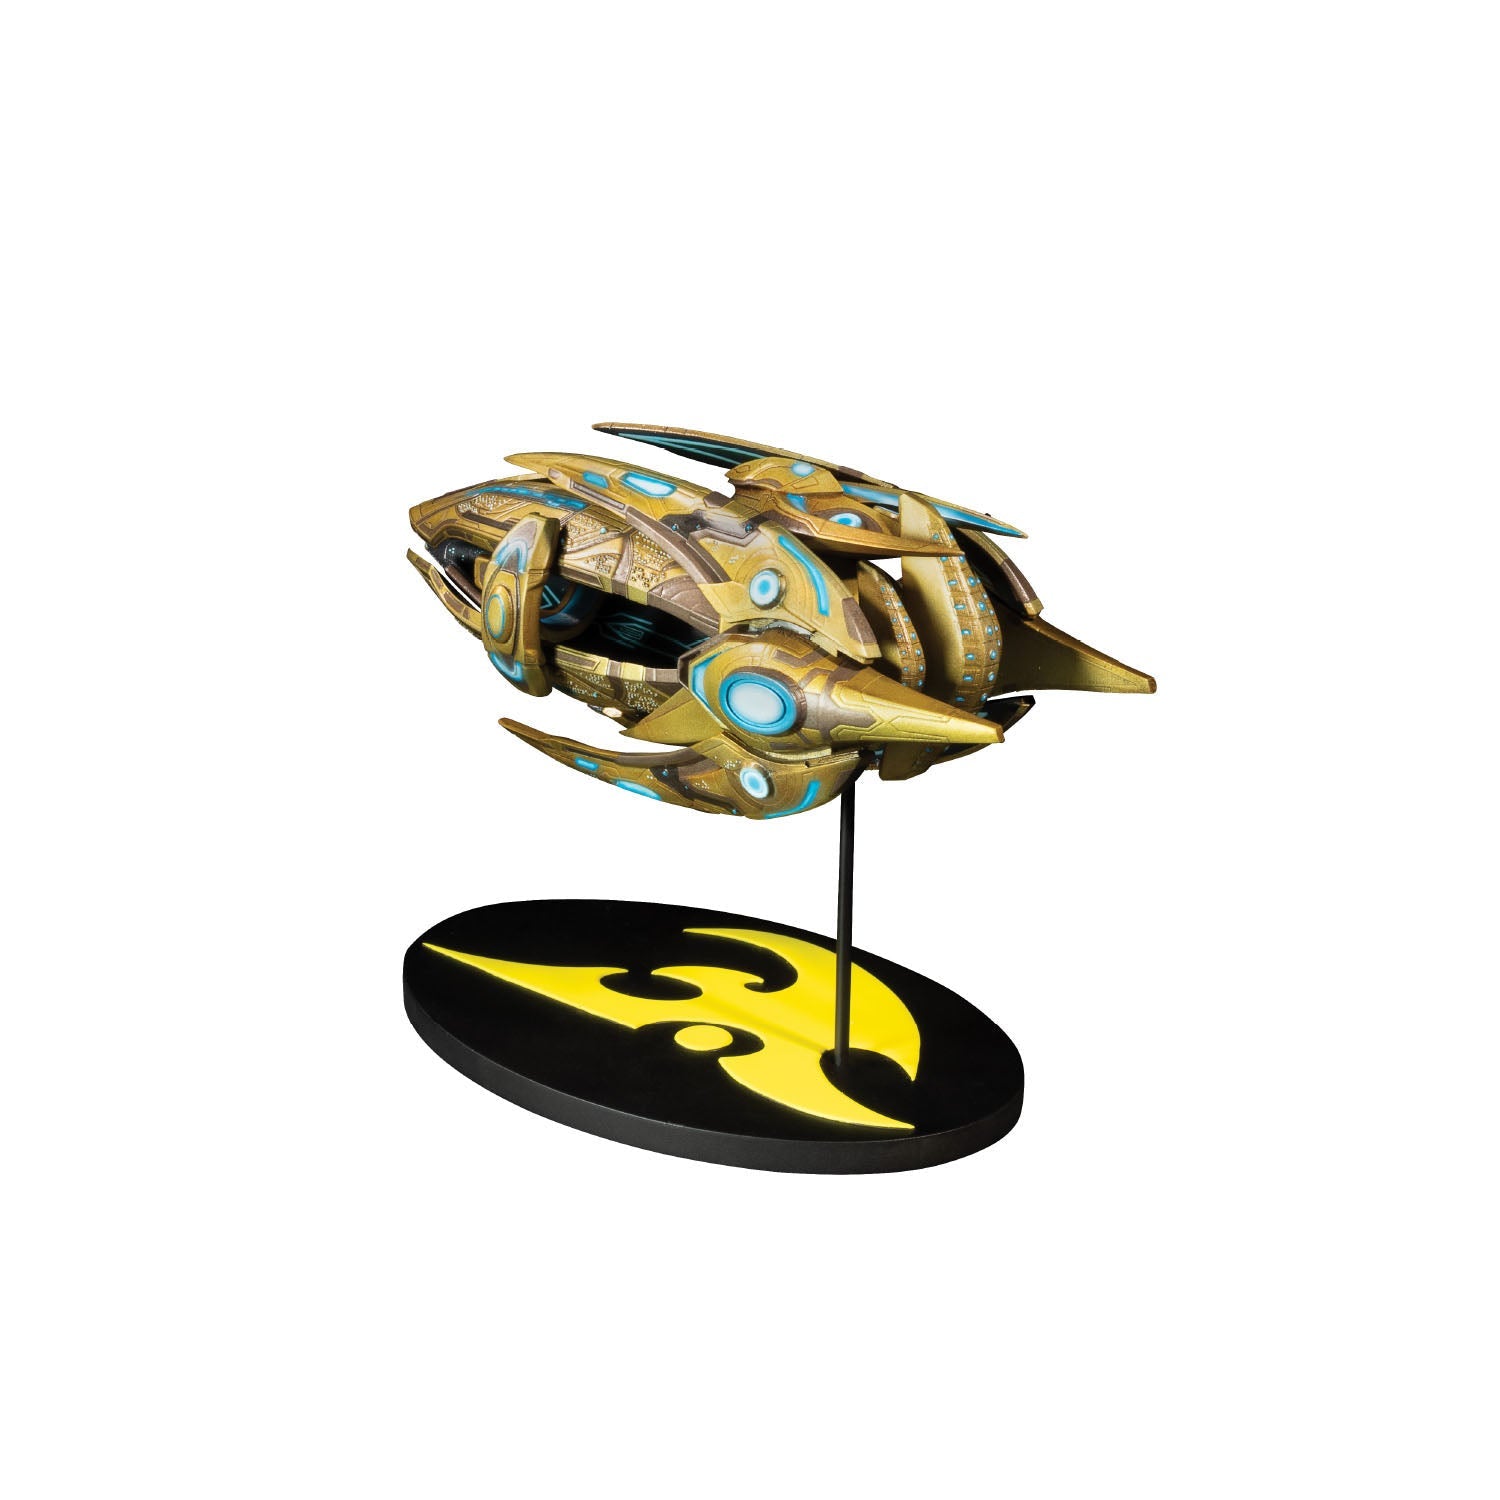 StarCraft Protoss Carrier Ship 7" Replica in Gold - Back Left View